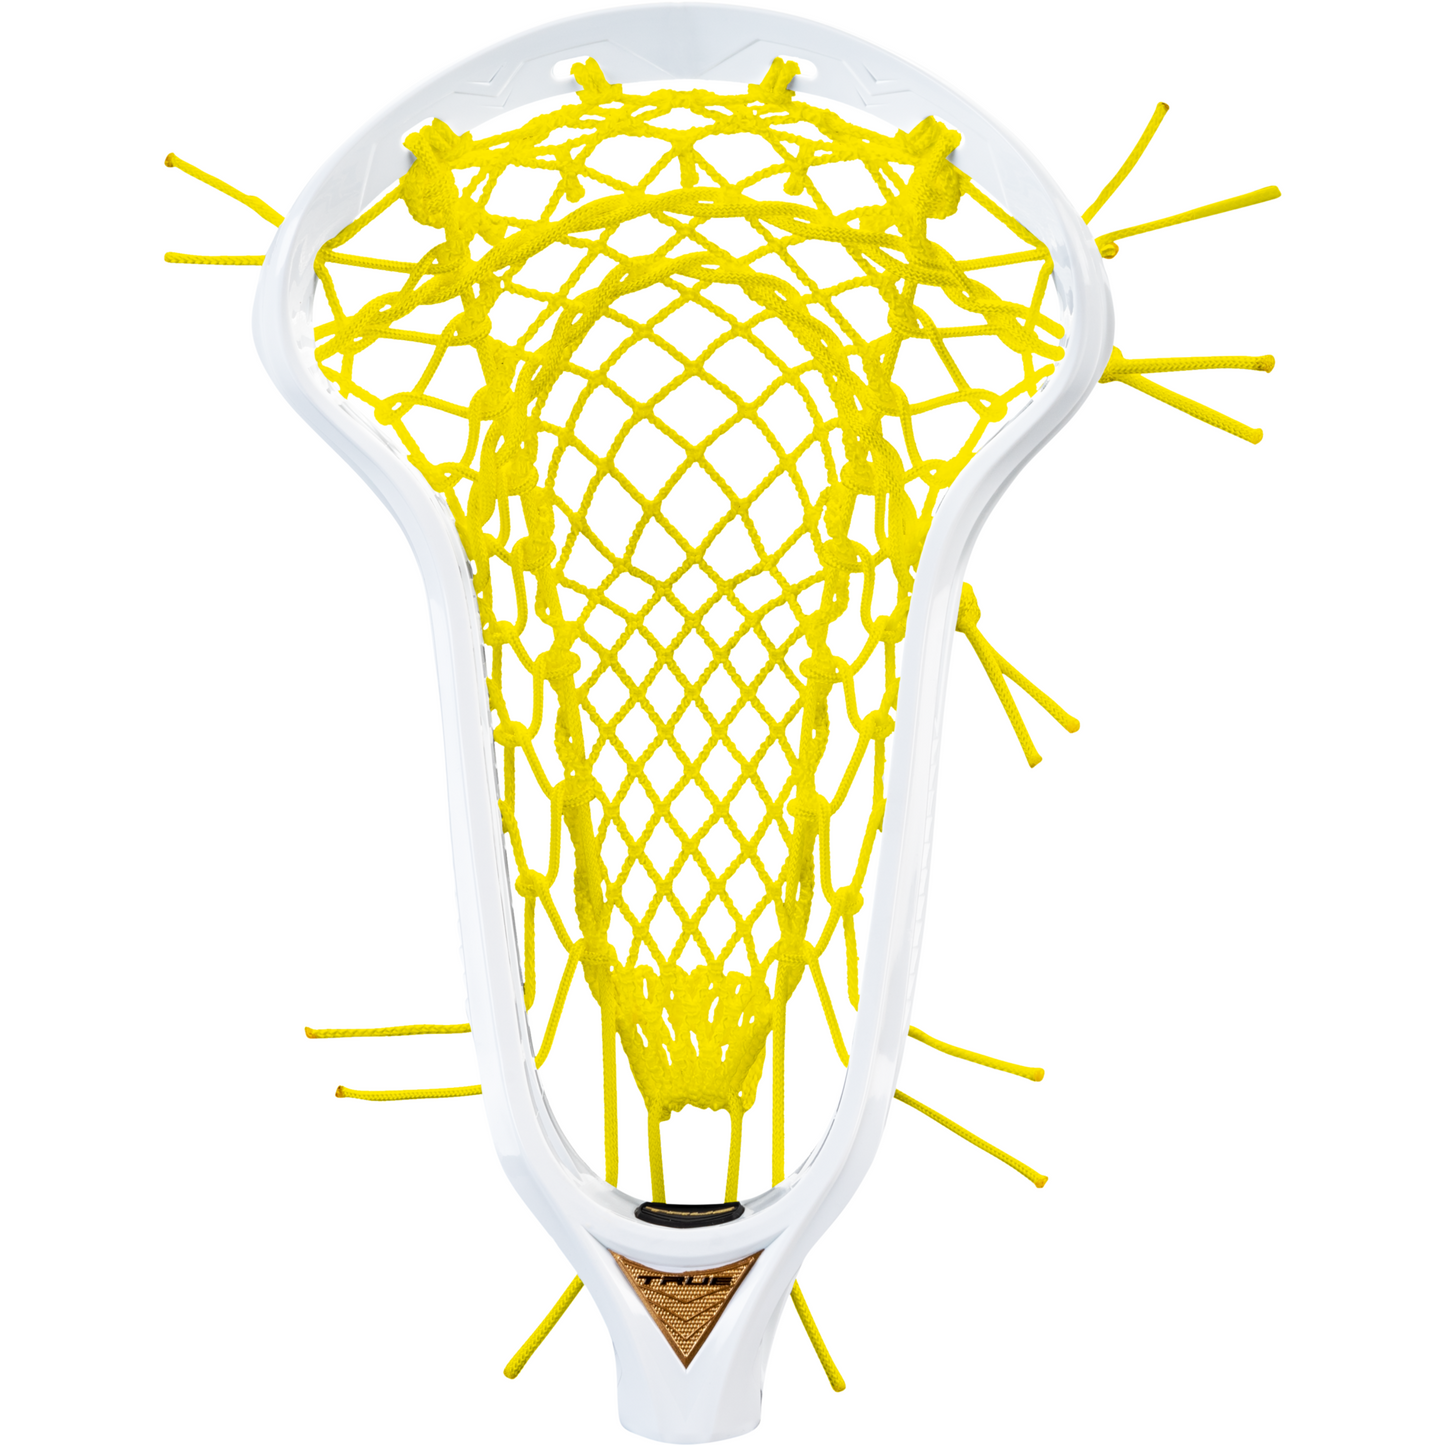 LYNX Ignition Runner Strung Women's Lacrosse Head, white head and yellow pocket